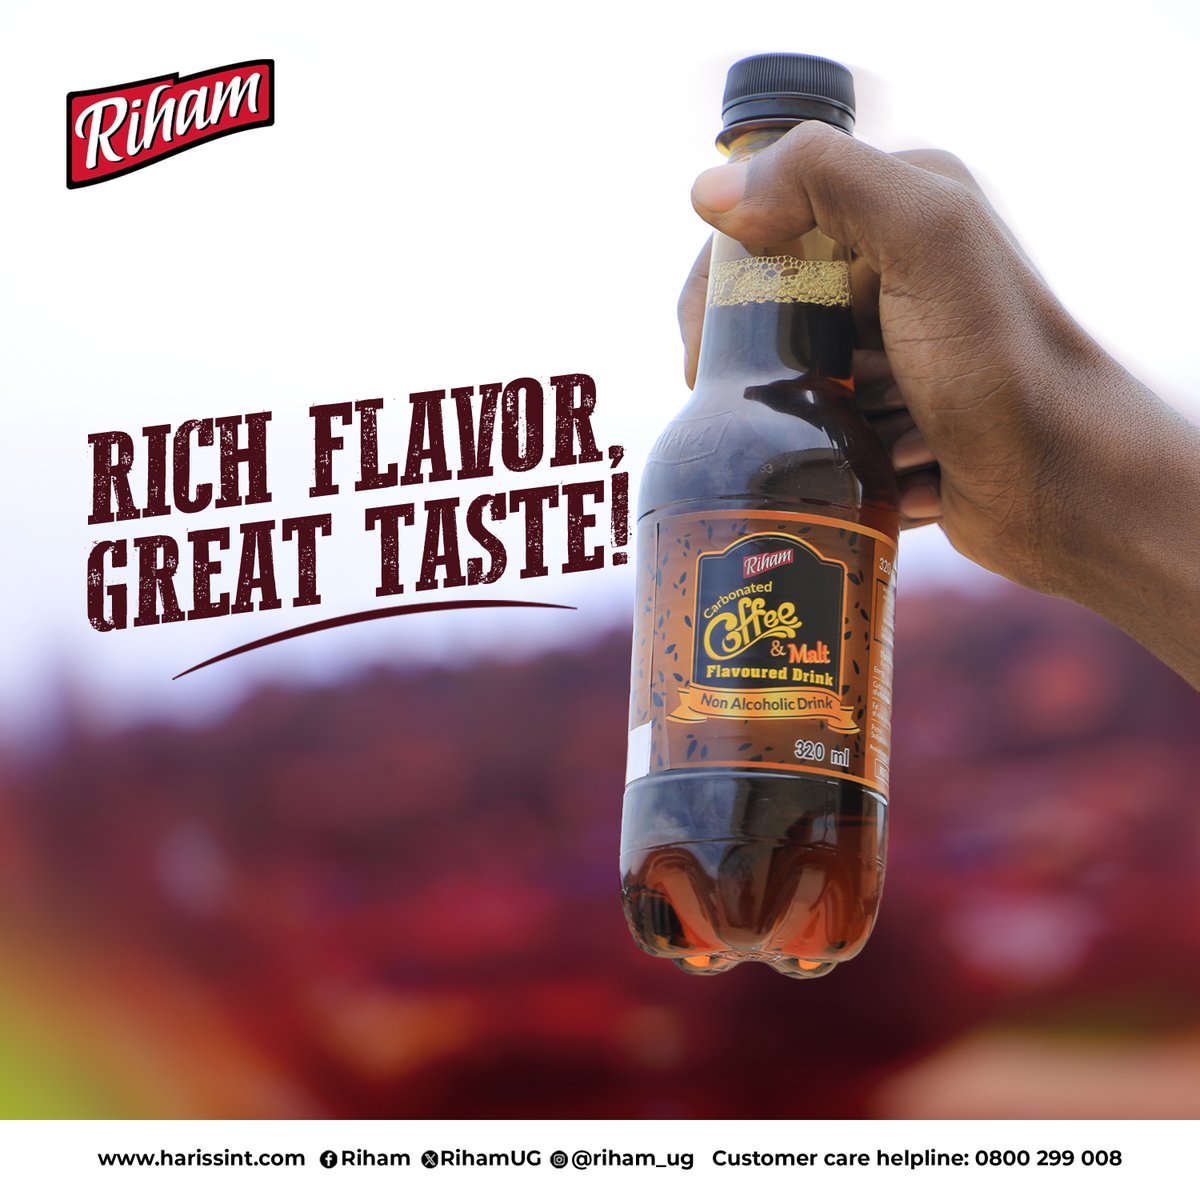 Awaken your senses with the refreshing flavor of our great-tasting coffee malt drink. Perfect for any time of the day!